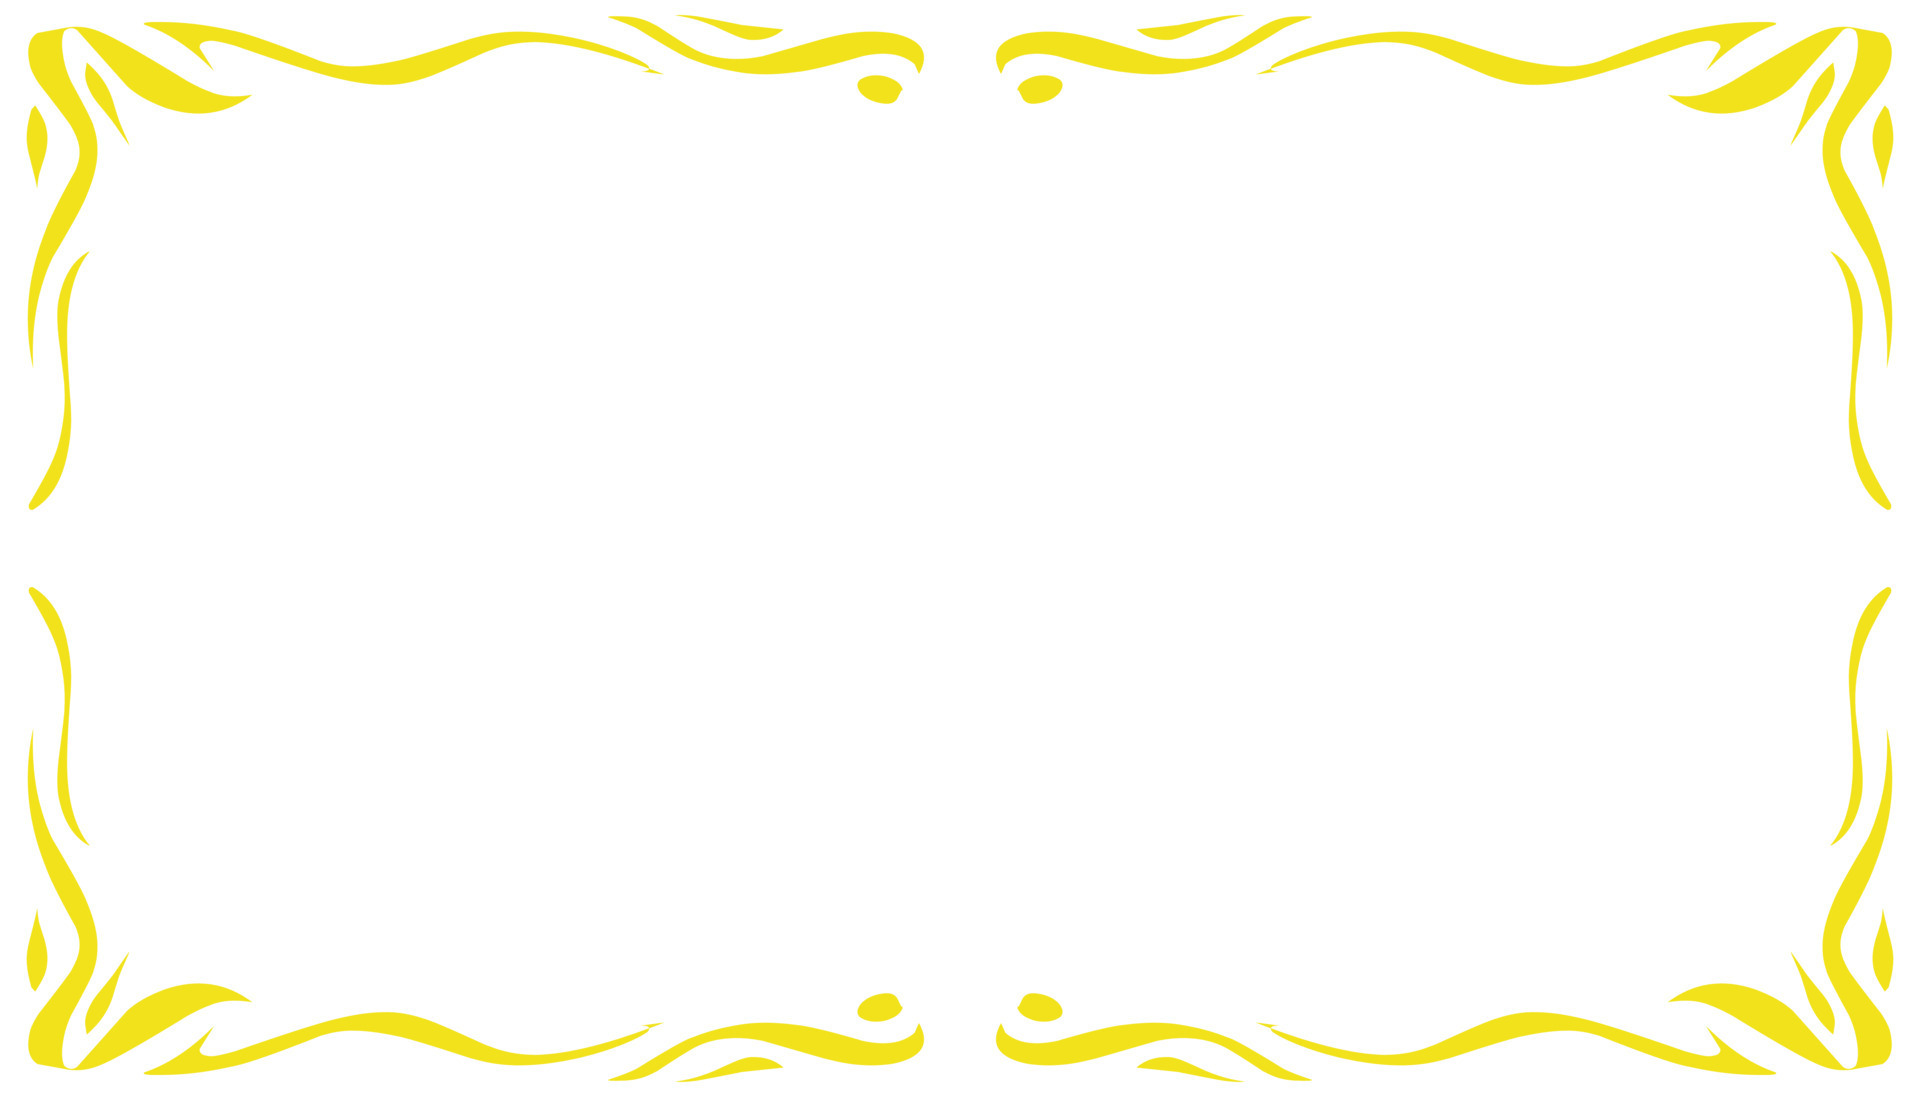 Yellow abstract frame border vintage illustration background 20764928 ...